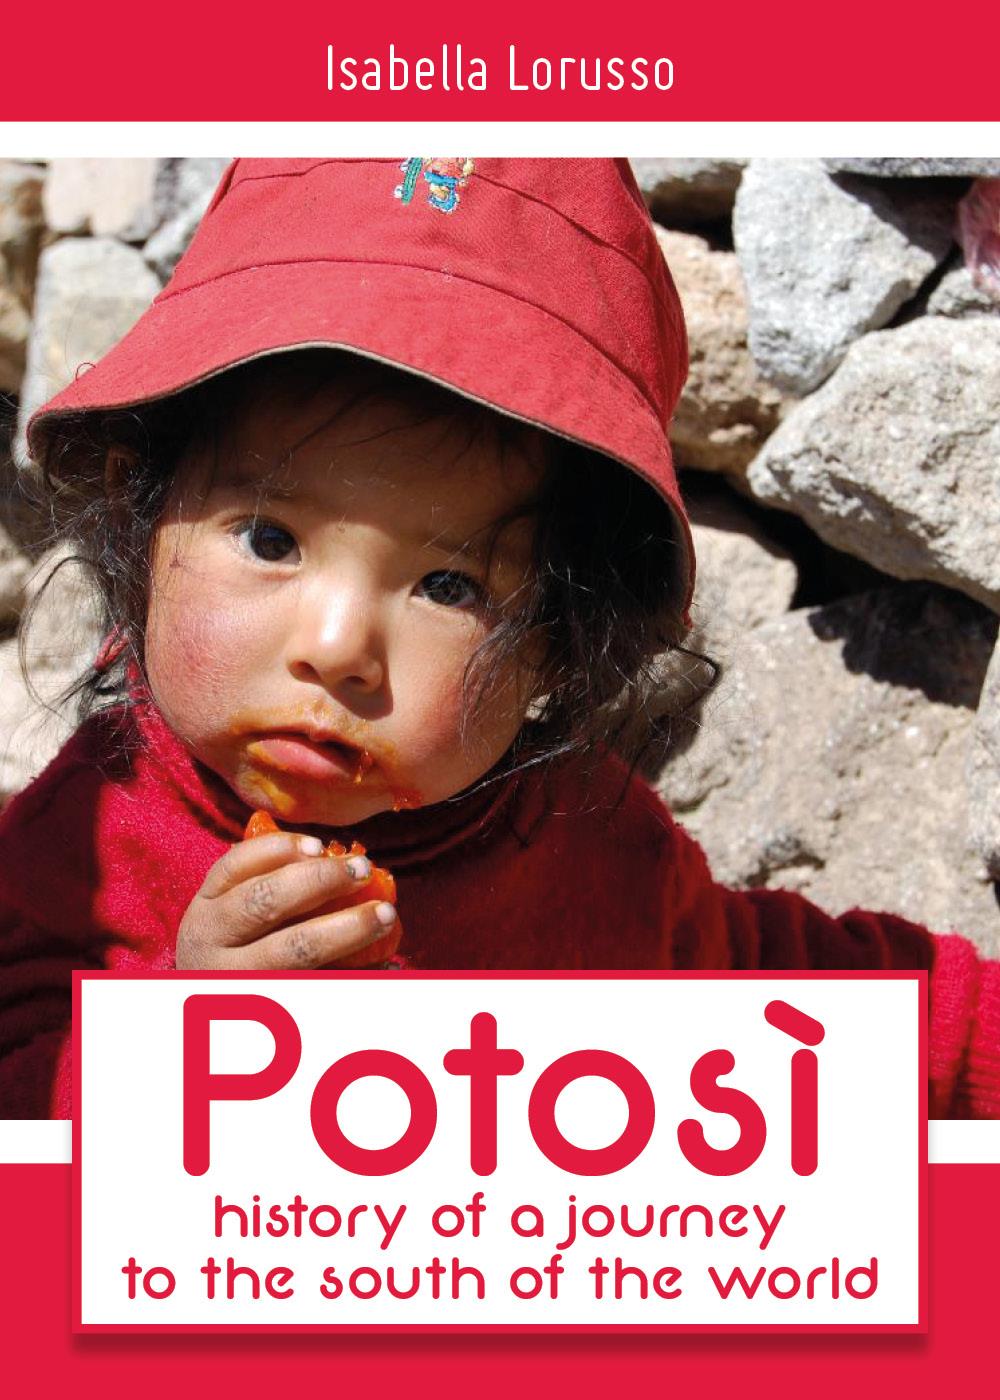 Potosi: history of a journey to the south of the world